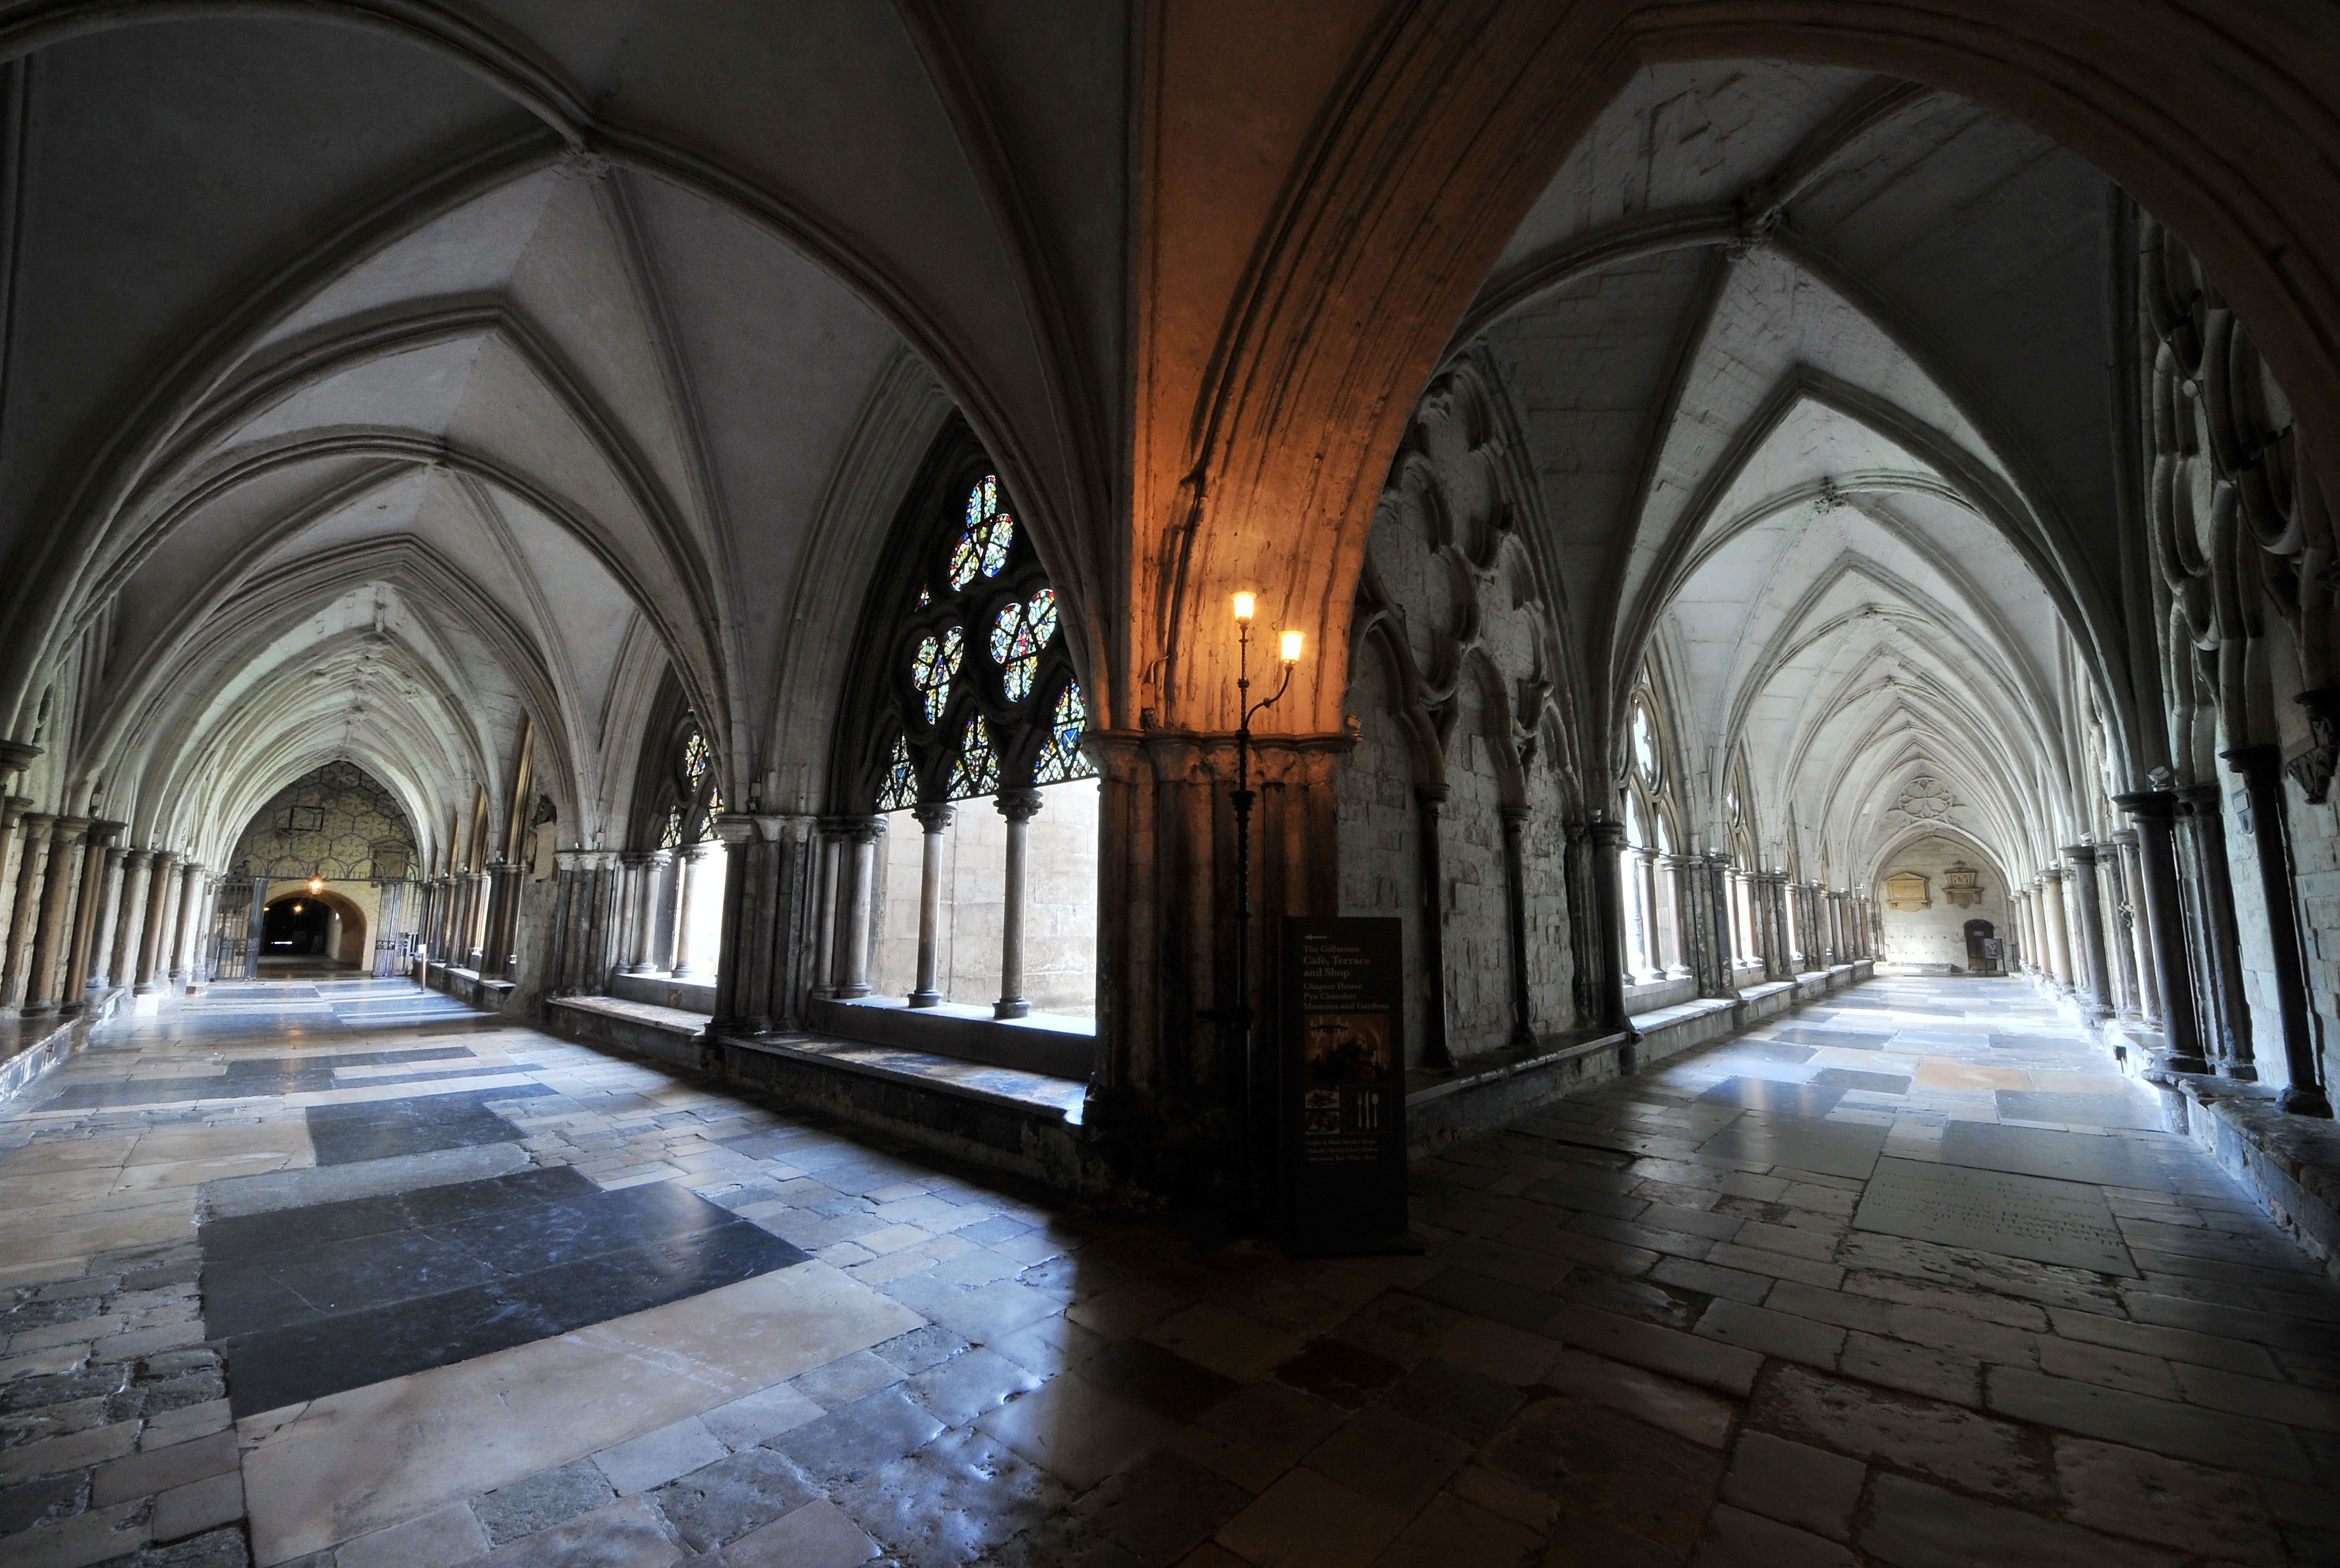 I chiostri dell'abbazia di Westminster (Ph. Copyright: Dean & Chapter of Westminster)